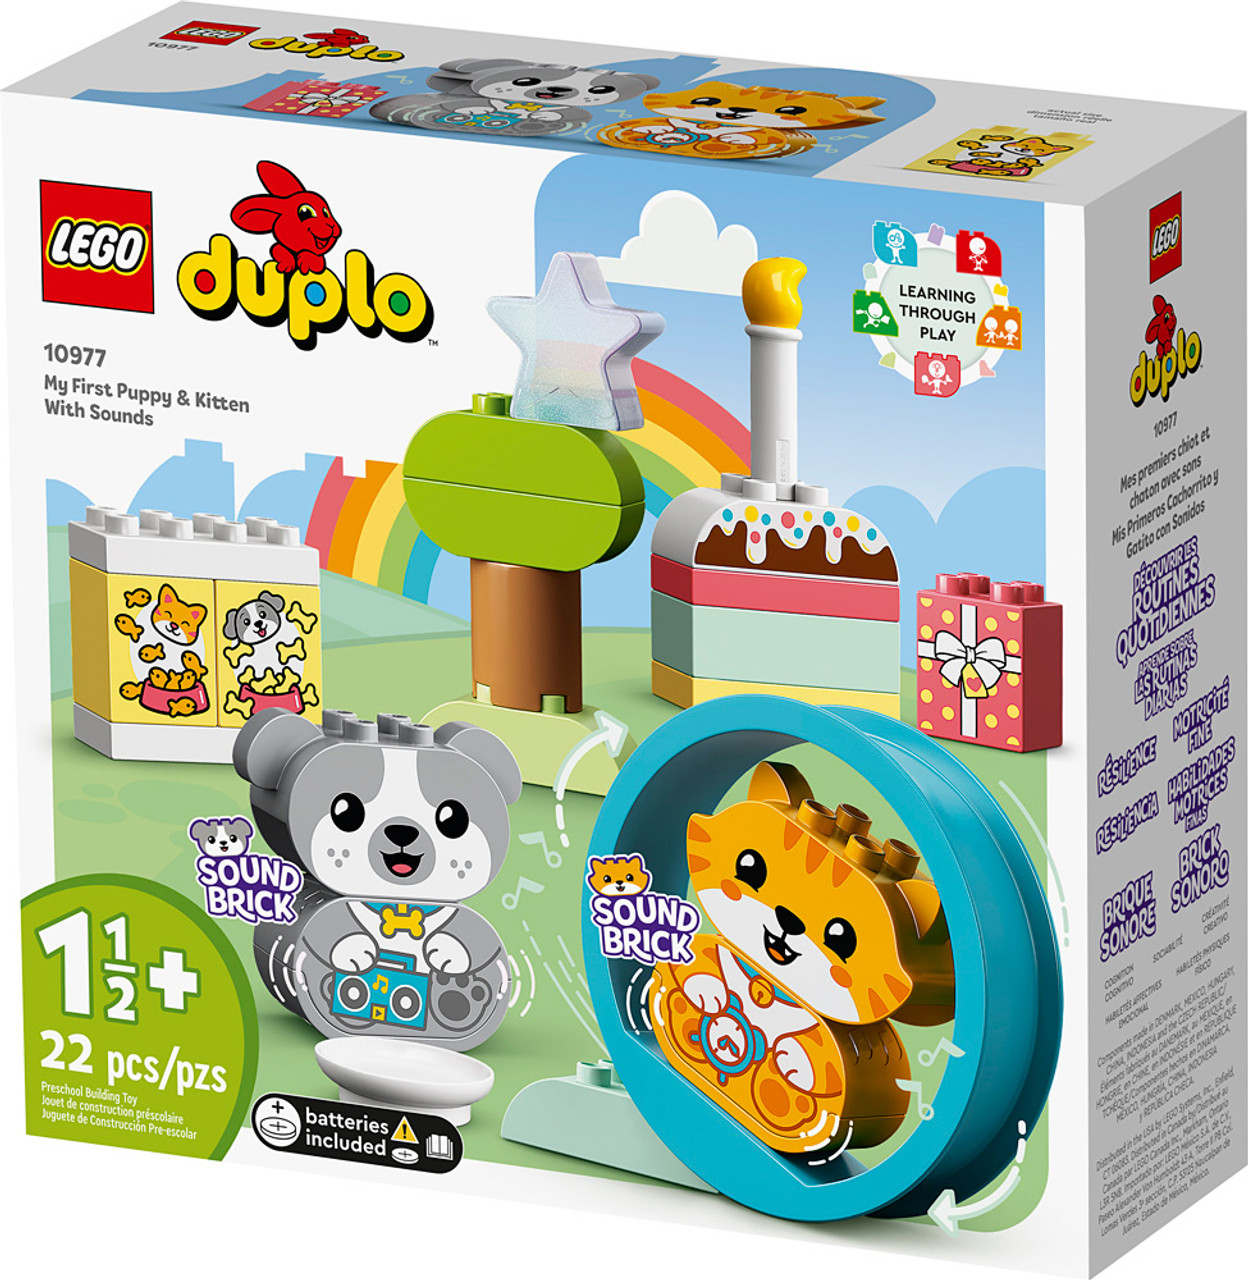 LEGO DUPLO My First Puppy & Kitten With Sounds 1